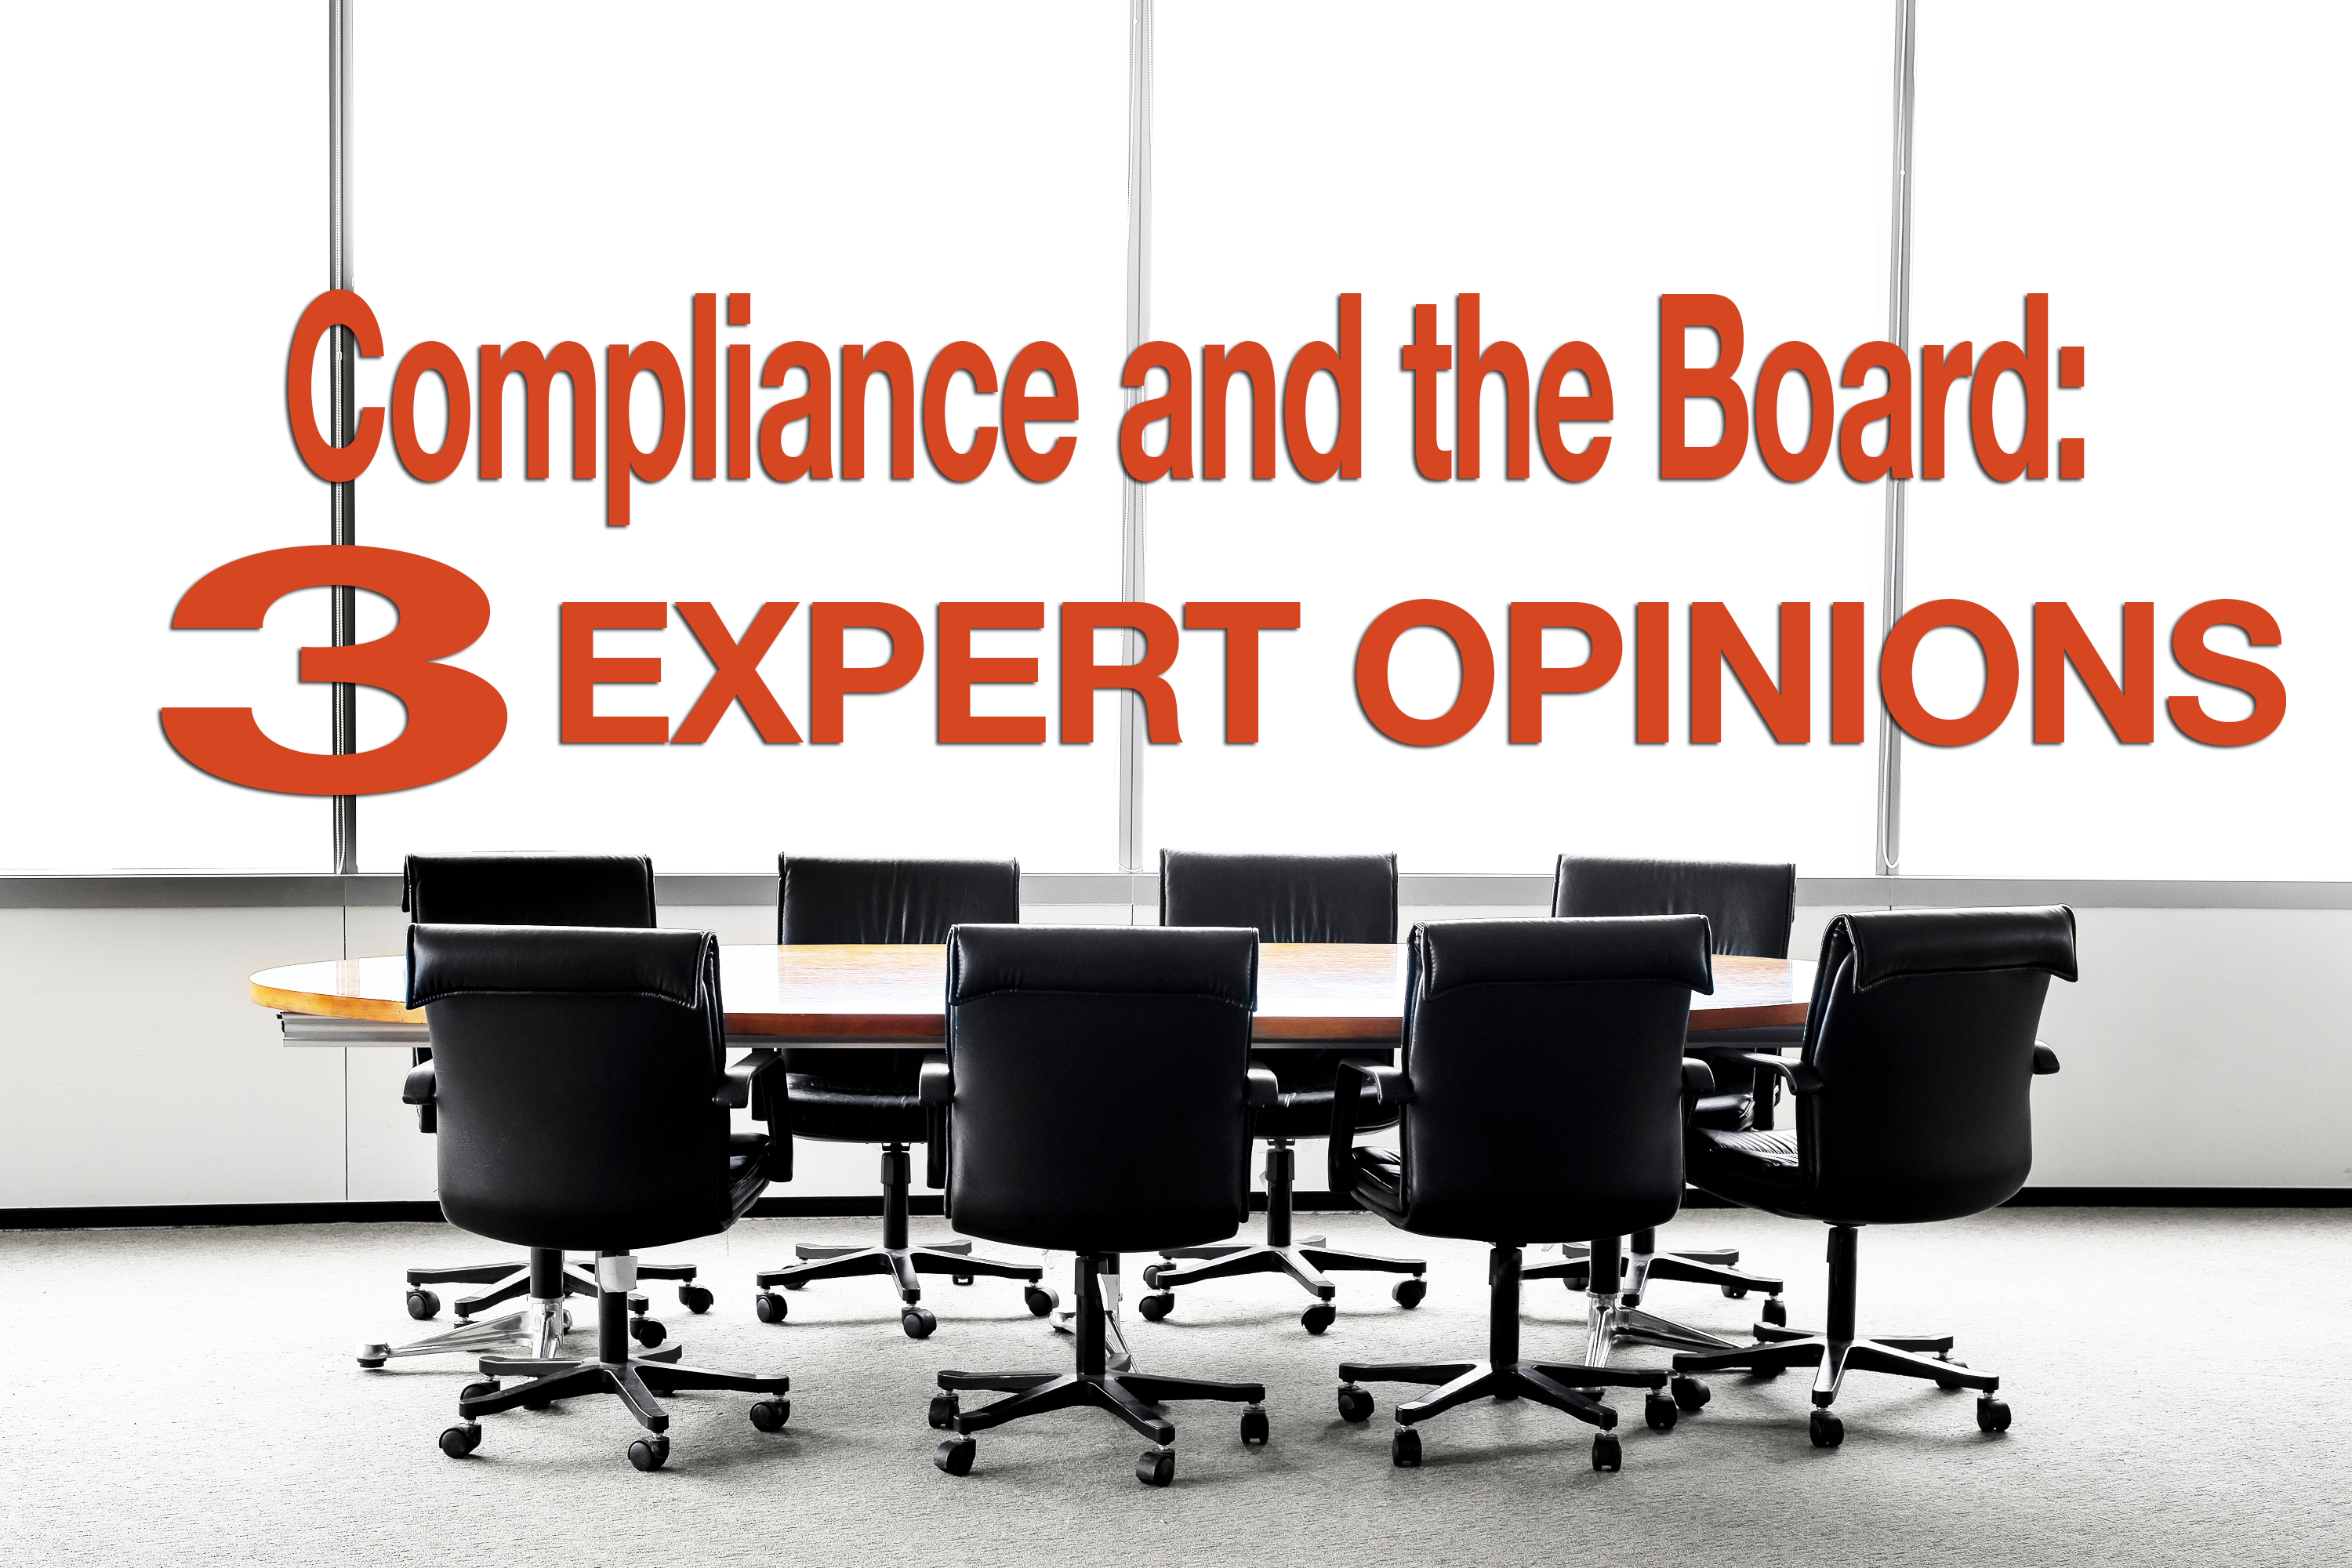 Compliance and the Board: 3 Expert Opinions